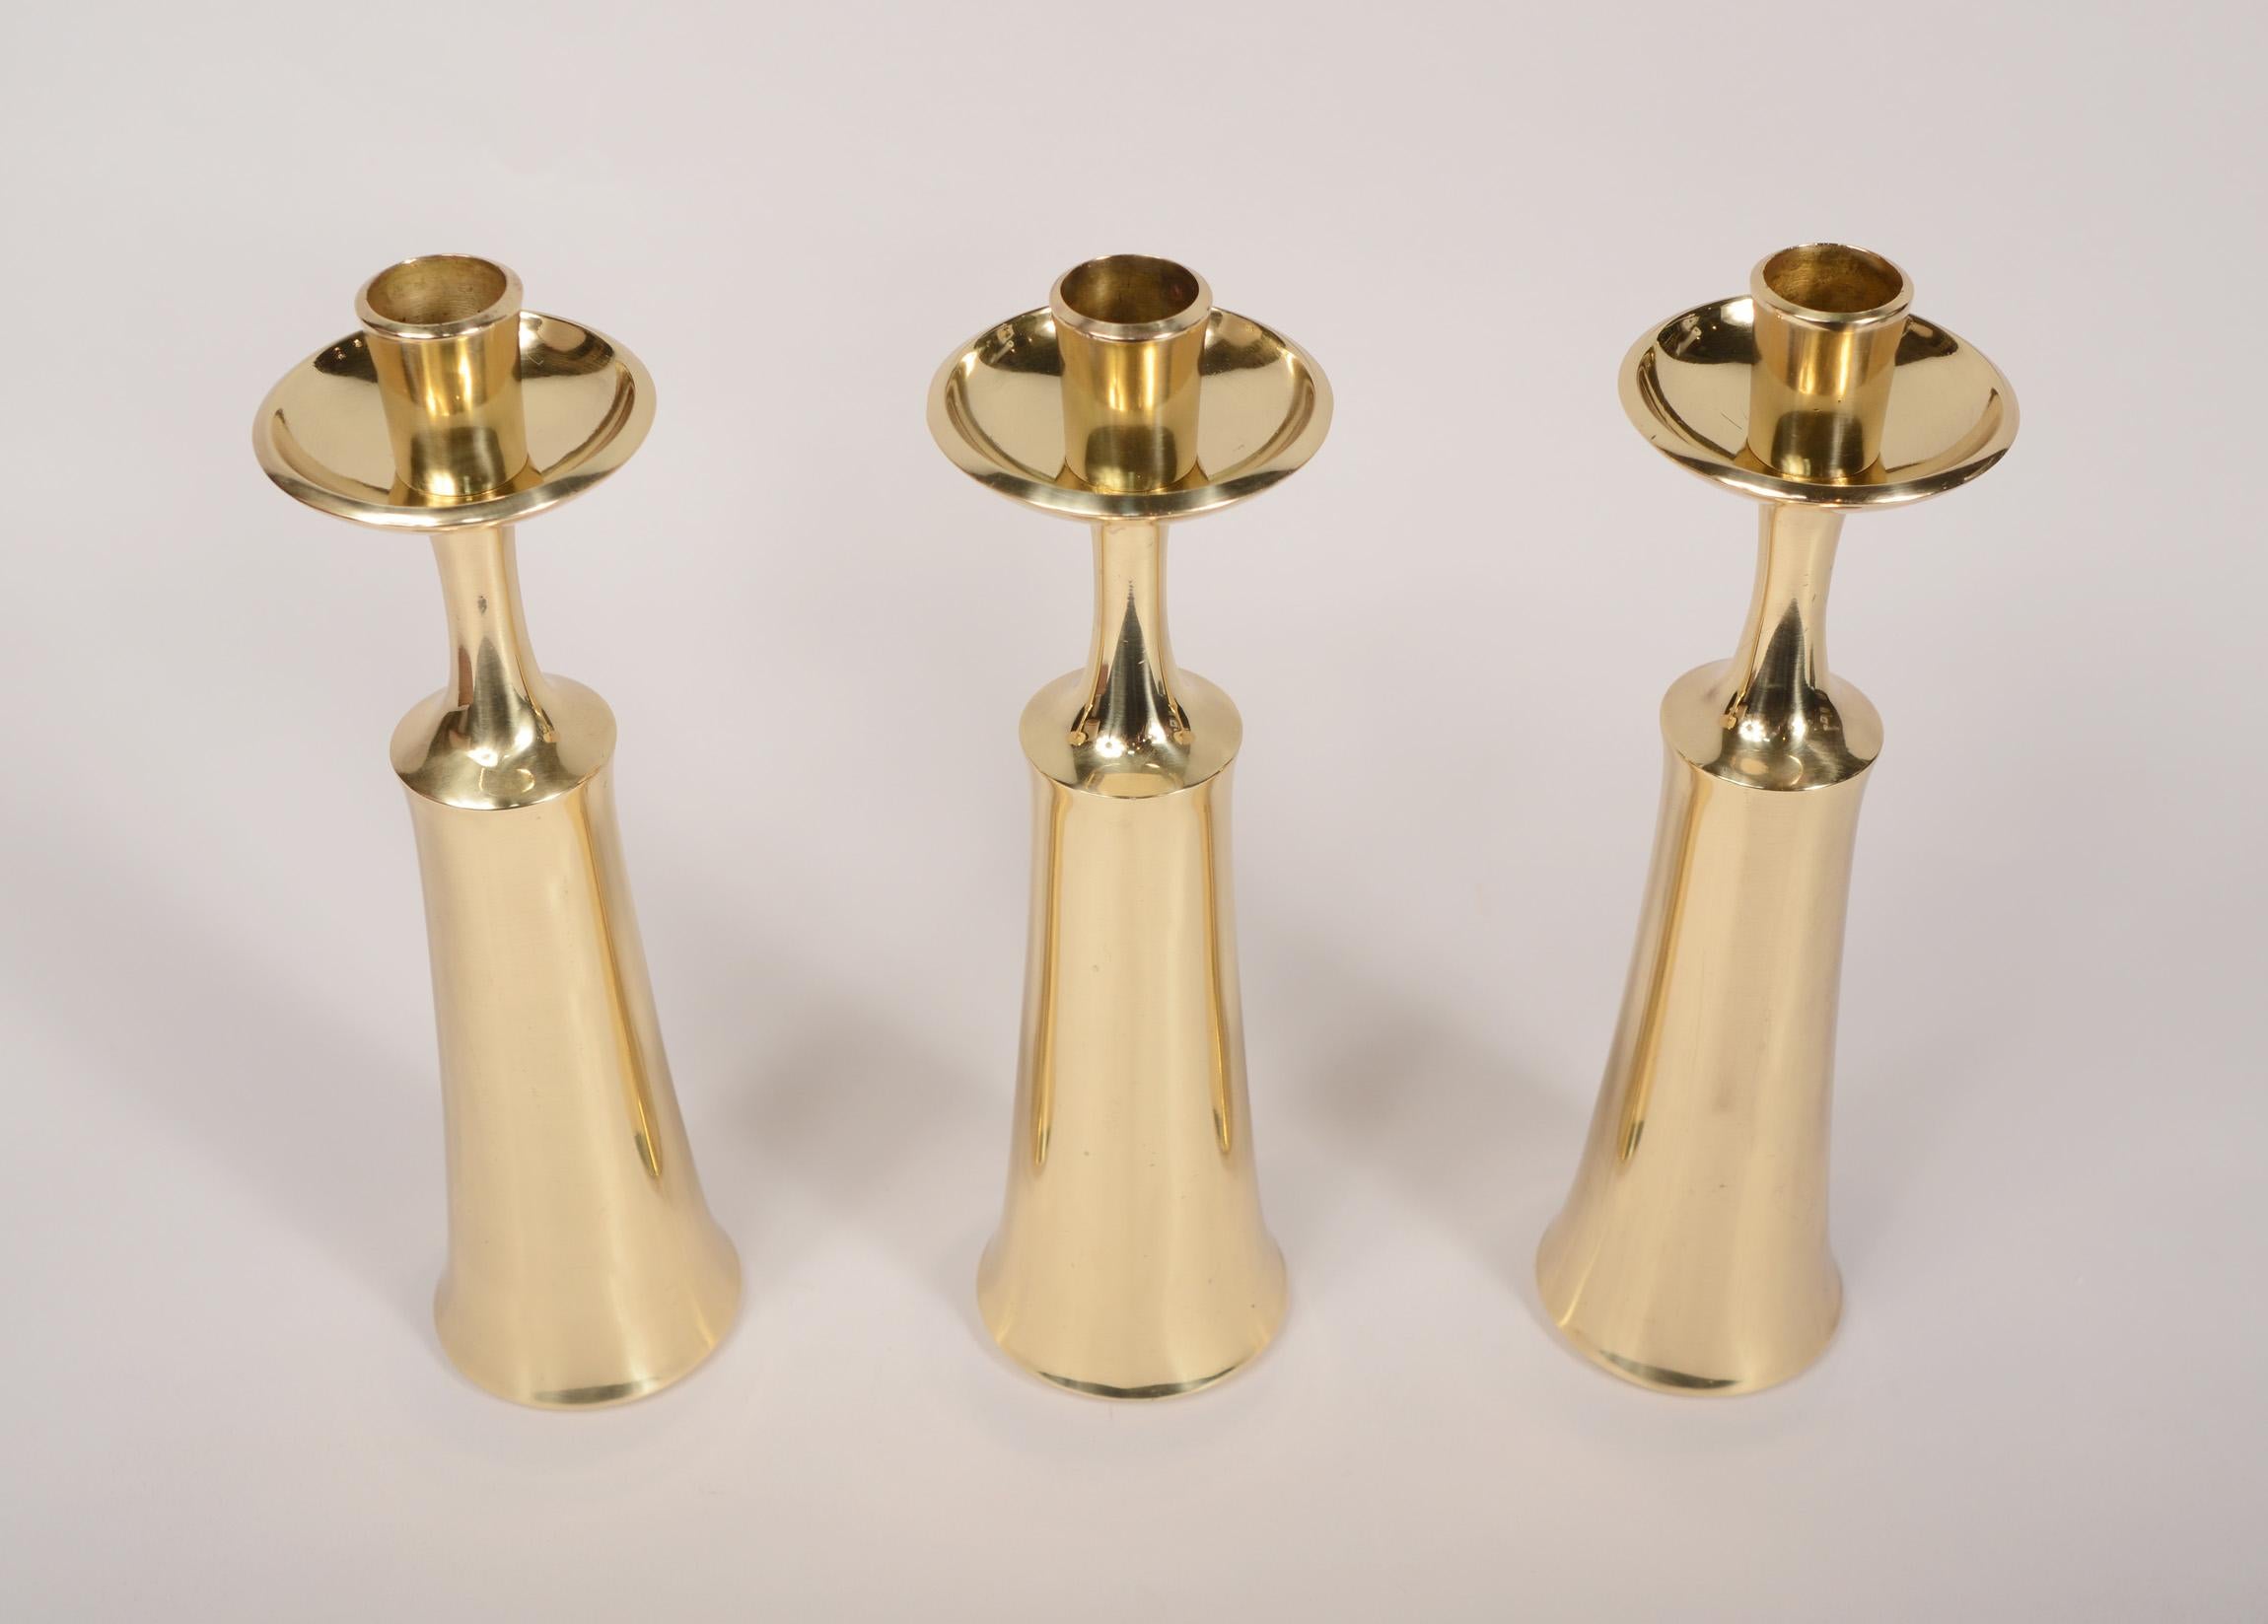 Set of three brass candle holders designed by Jens Quistgaard for Dansk. These have a very elegant modern design. The top portion of the candle holder can be removed and then with the piece turned over it becomes a bud vase.